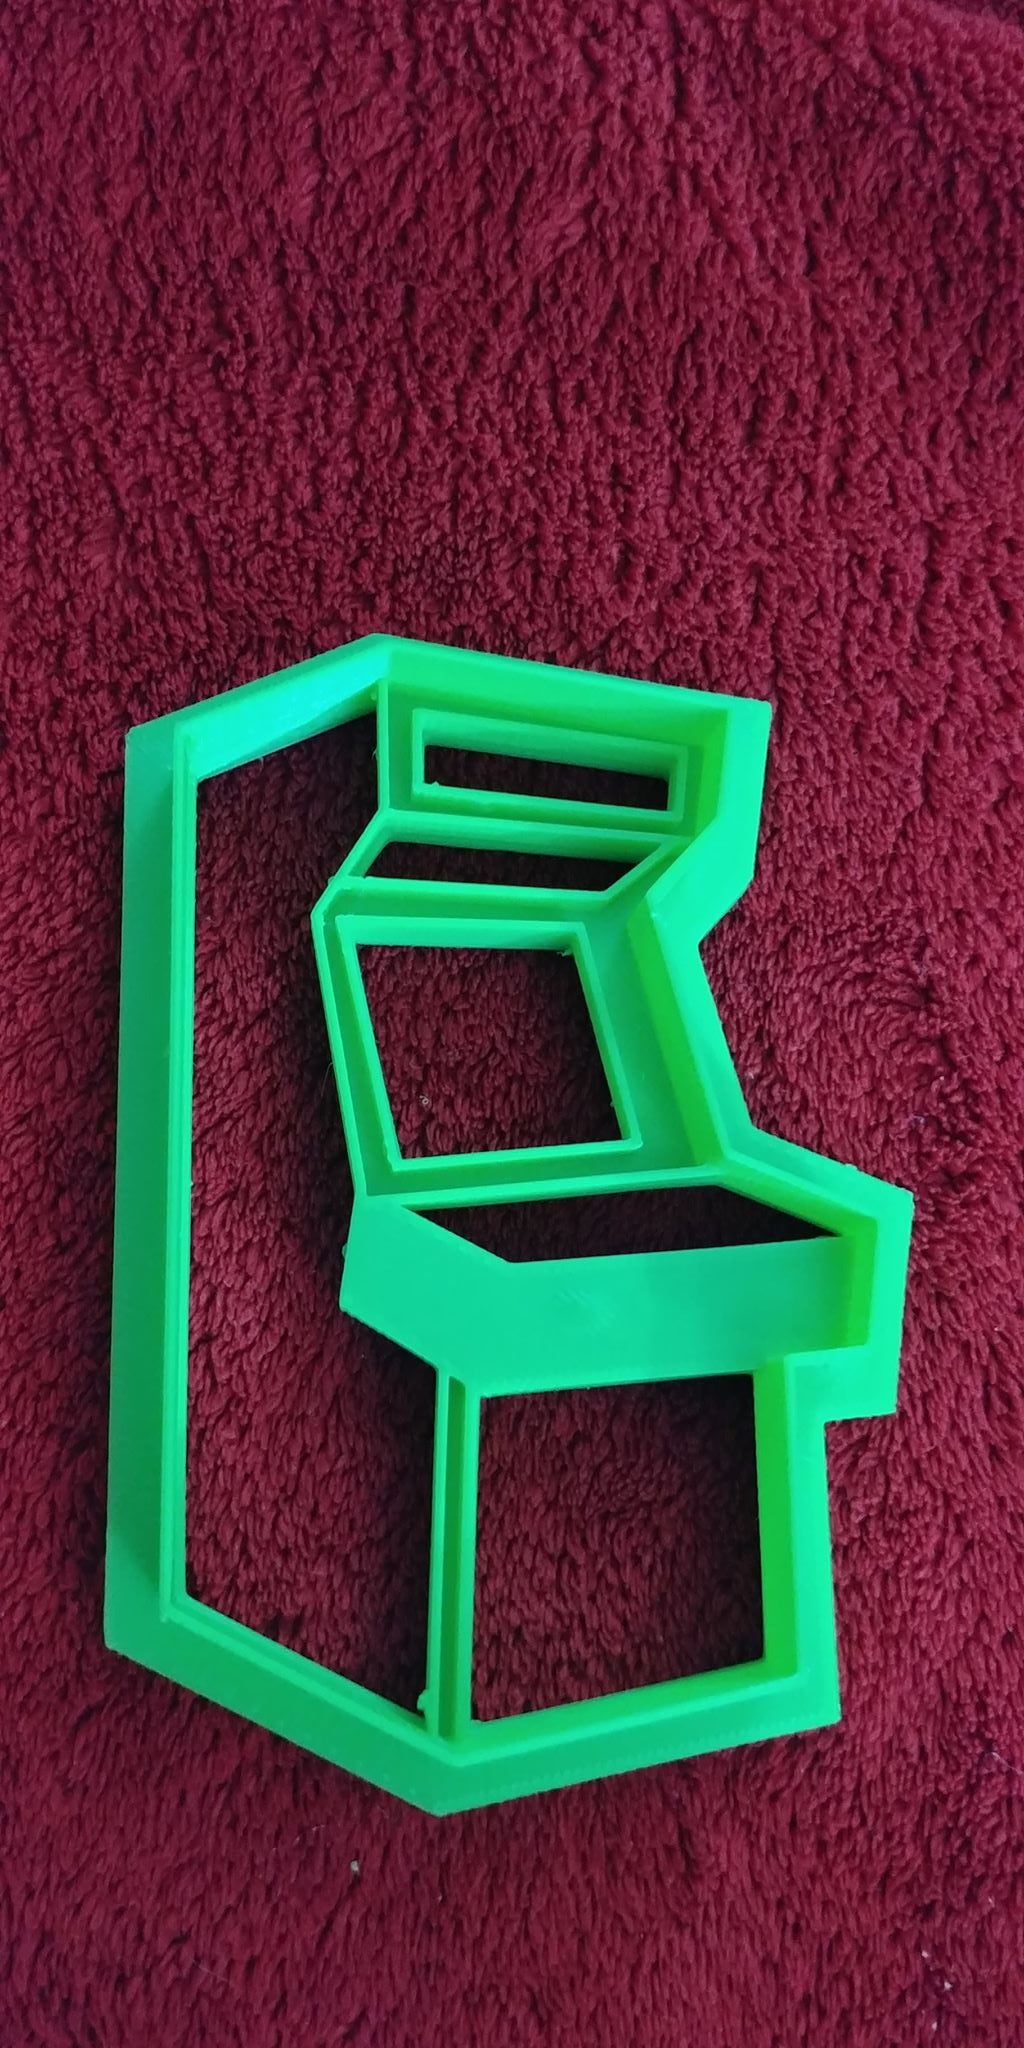 3D Printed Cookie Cutter Inspired by Vintage Arcade Cabinet